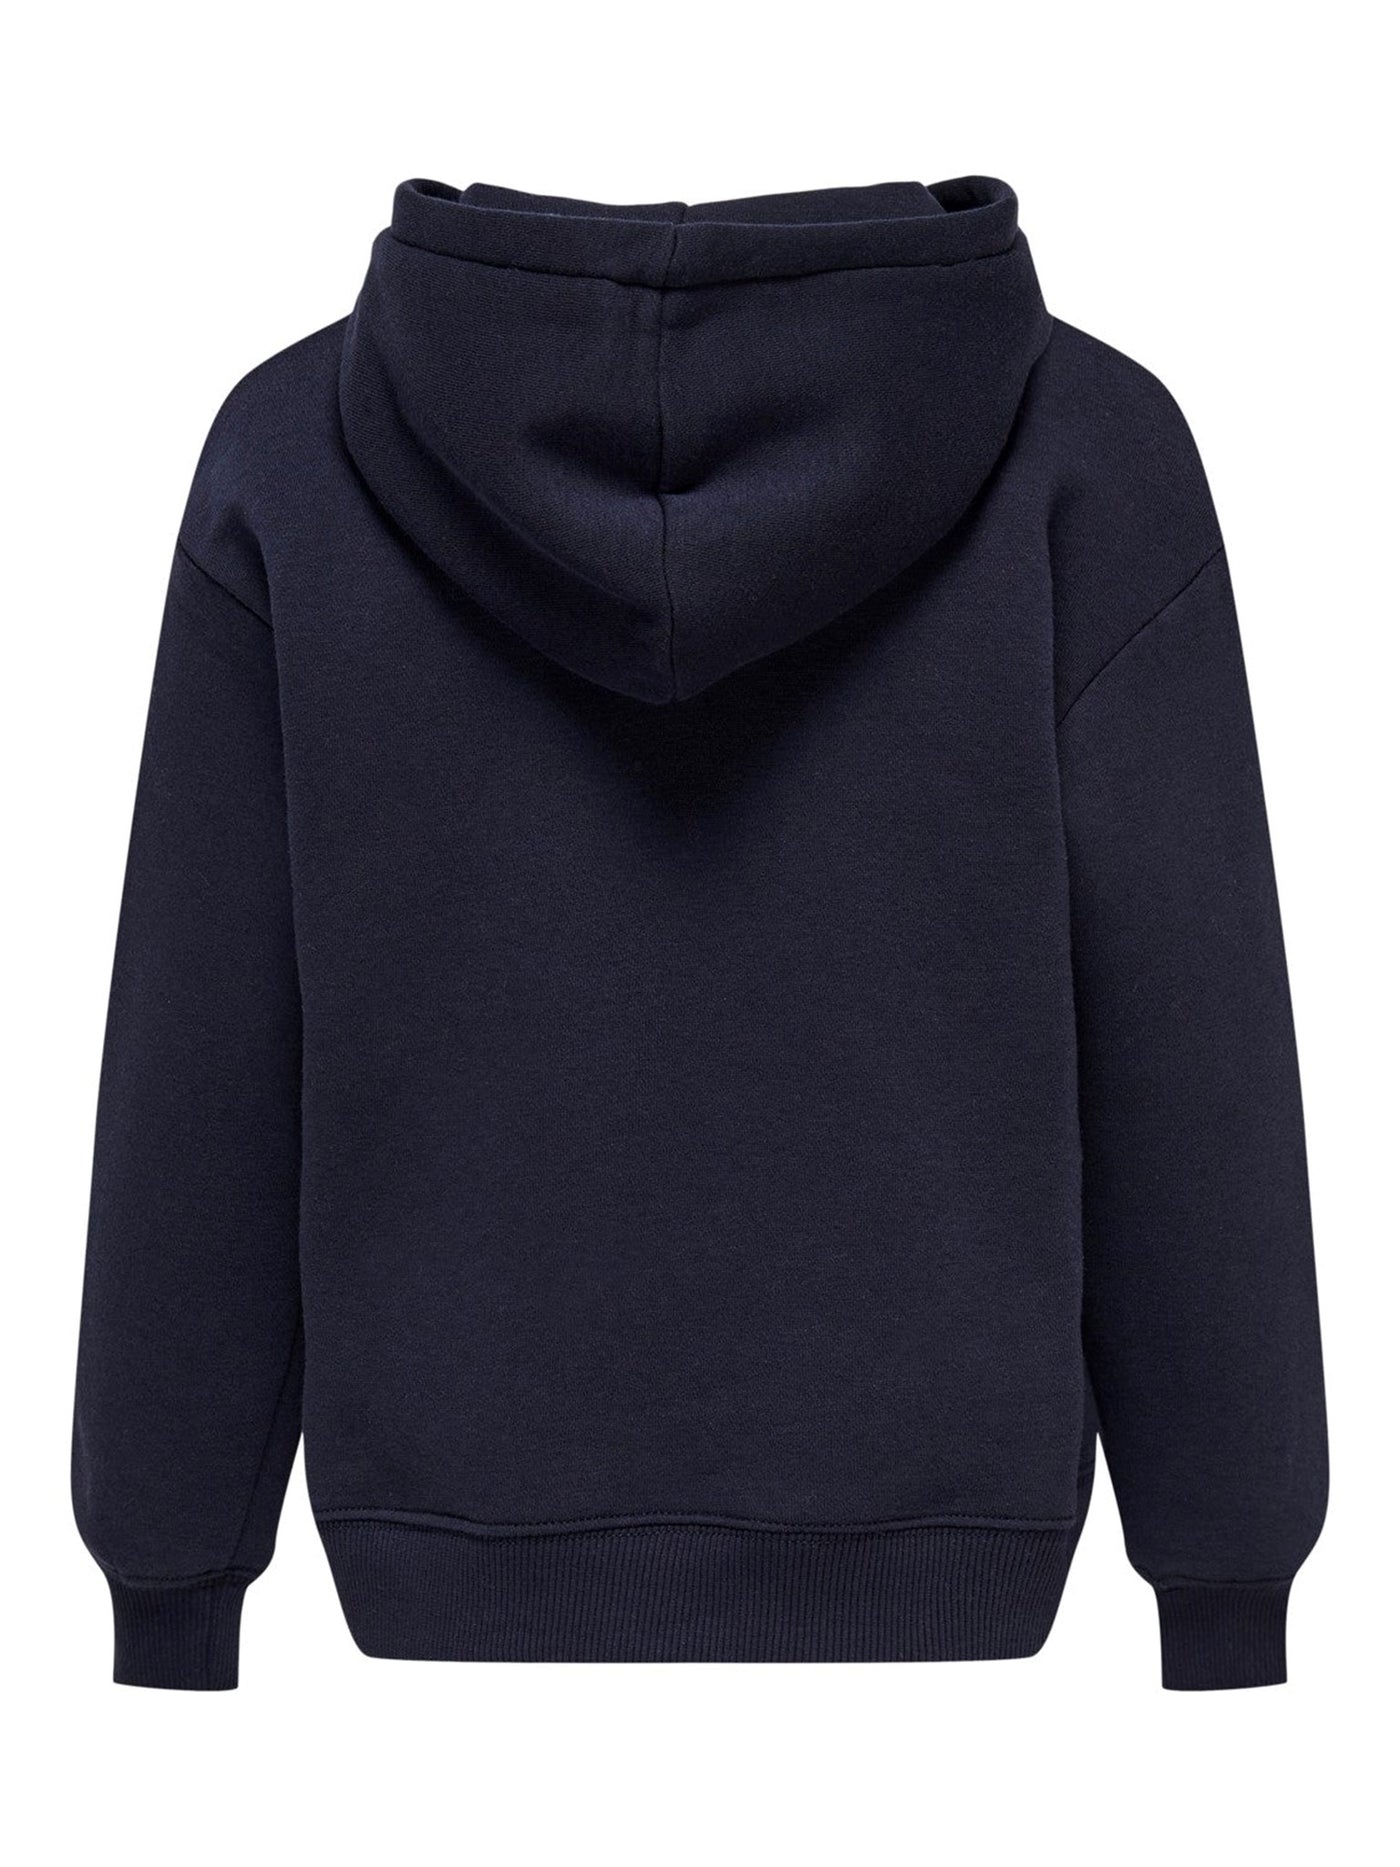 Every Life Small Logo Hoodie - Night Sky - Kids Only 2